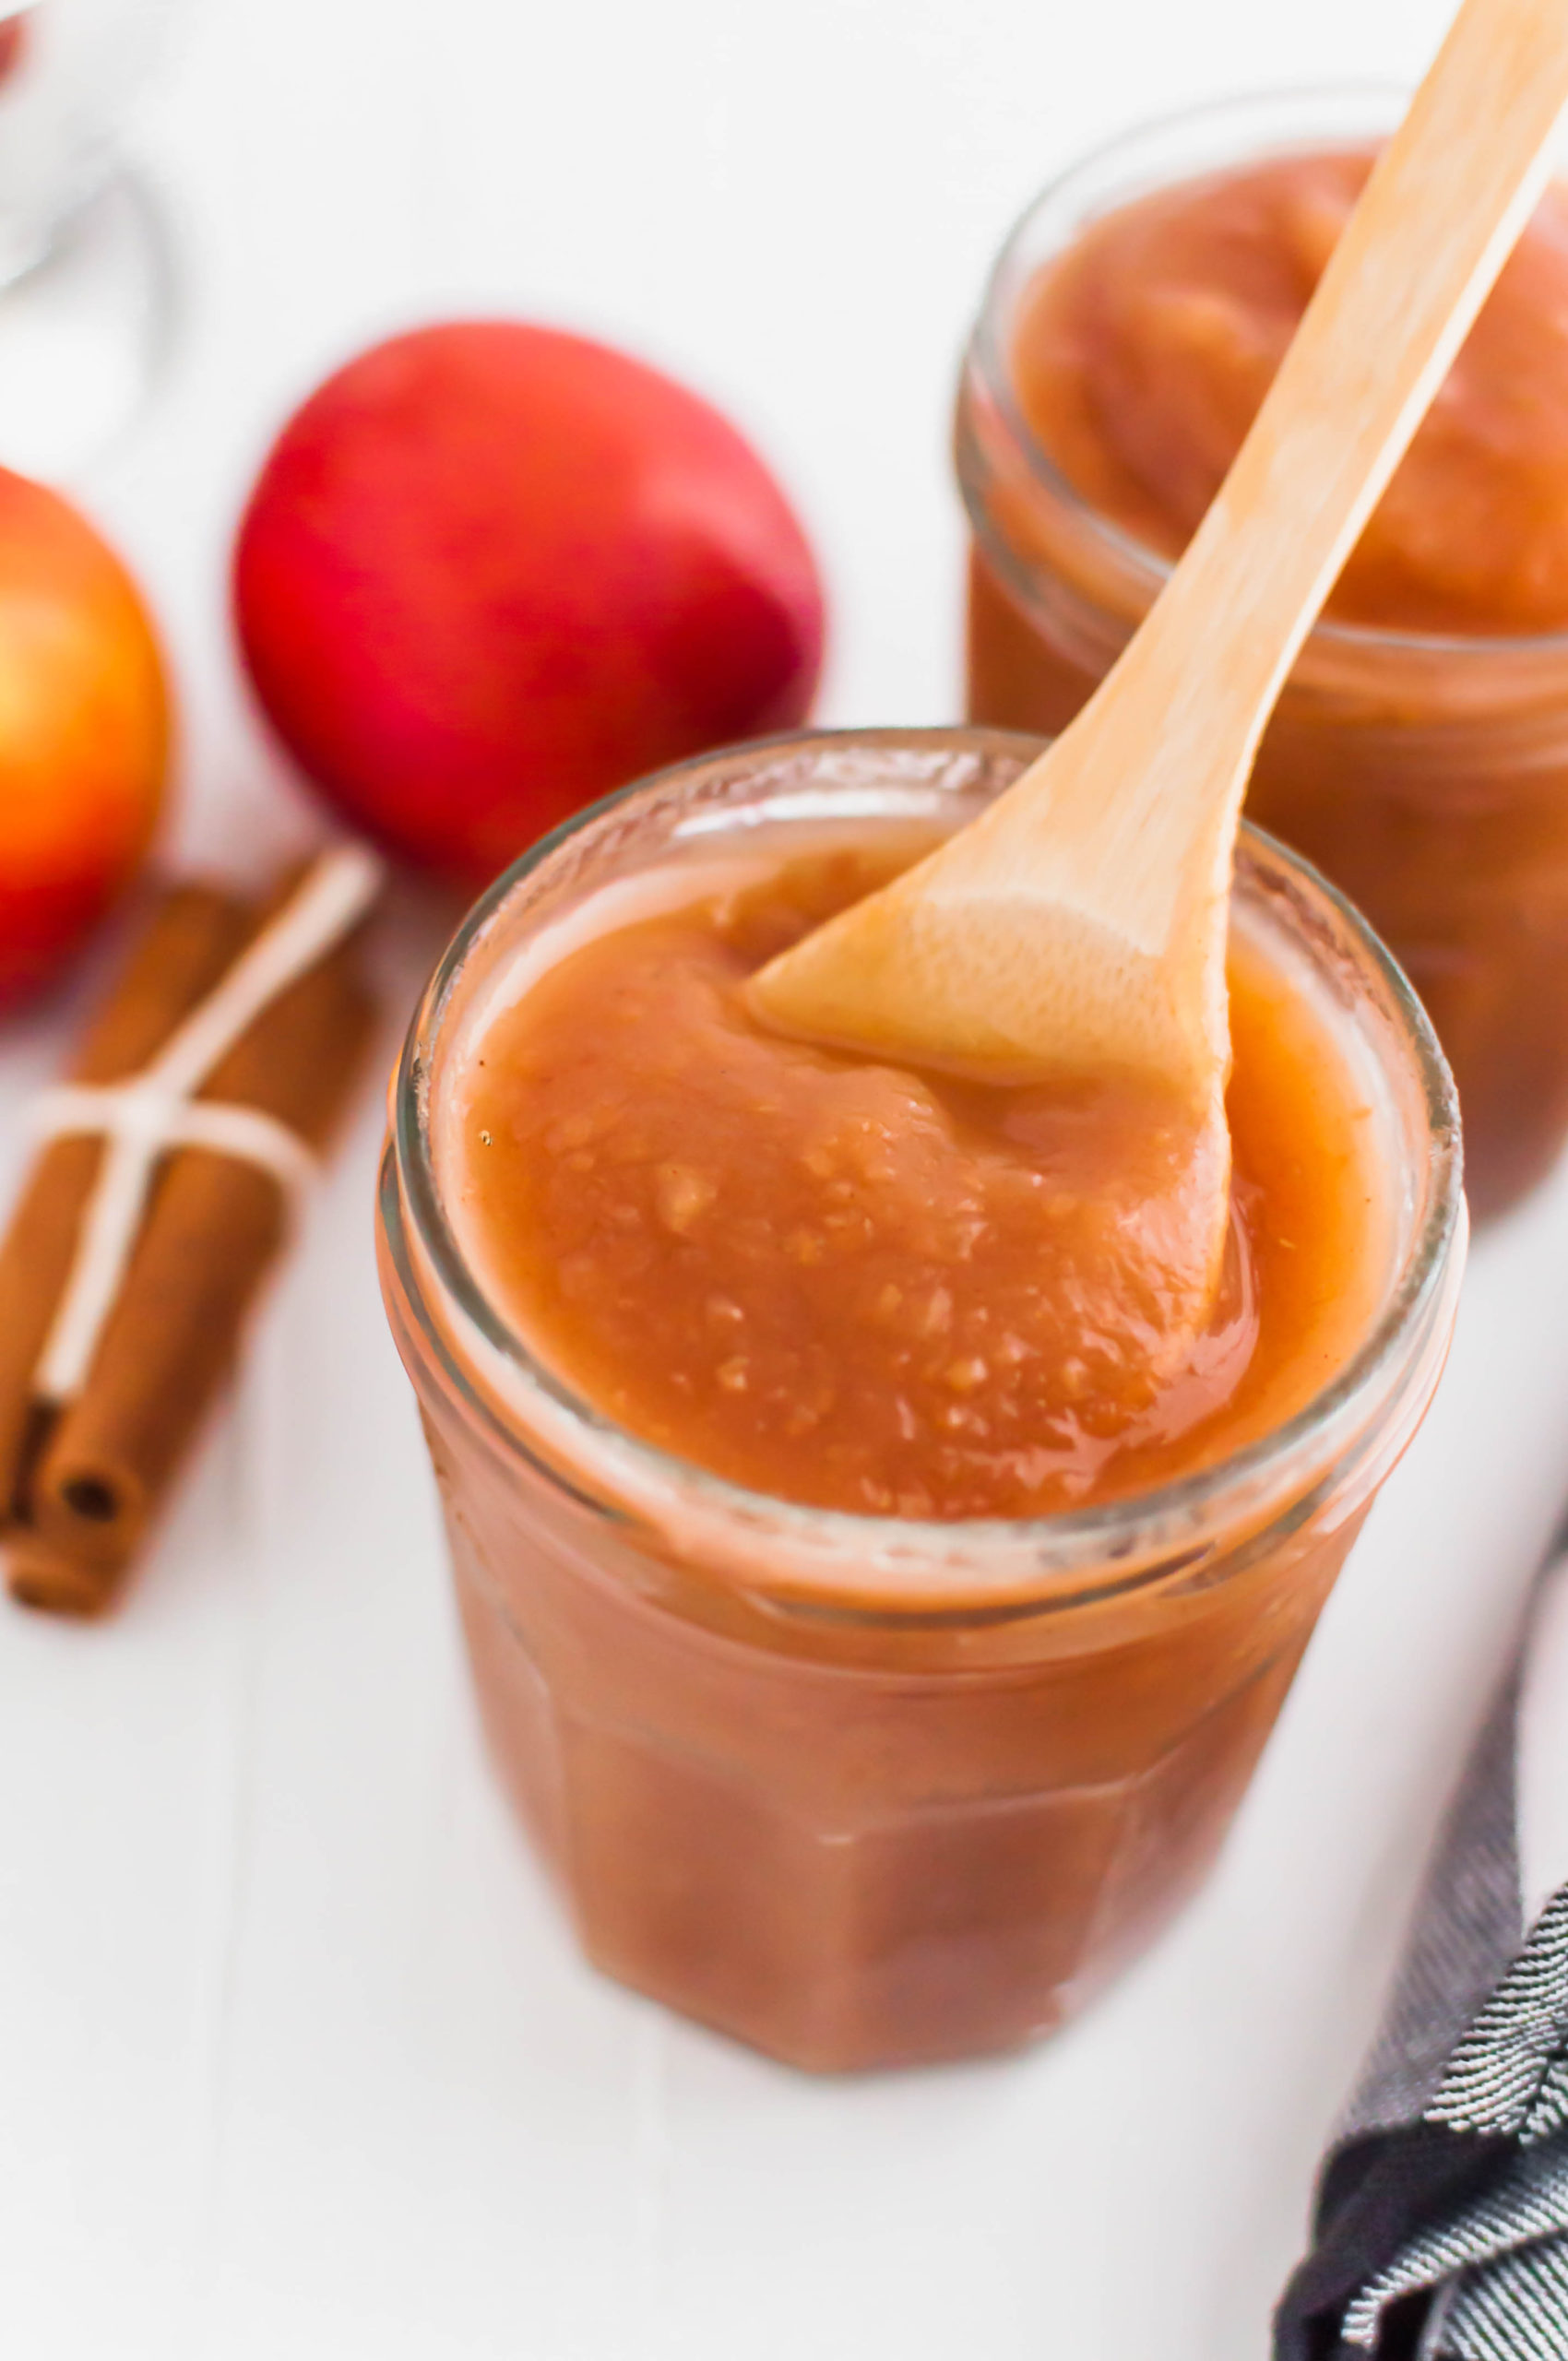 It's apple season! Grab some fresh apples to make your own Instant Pot Applesauce. Simple to make and you can control the ingredients and sweetness. Super fresh and delicious.